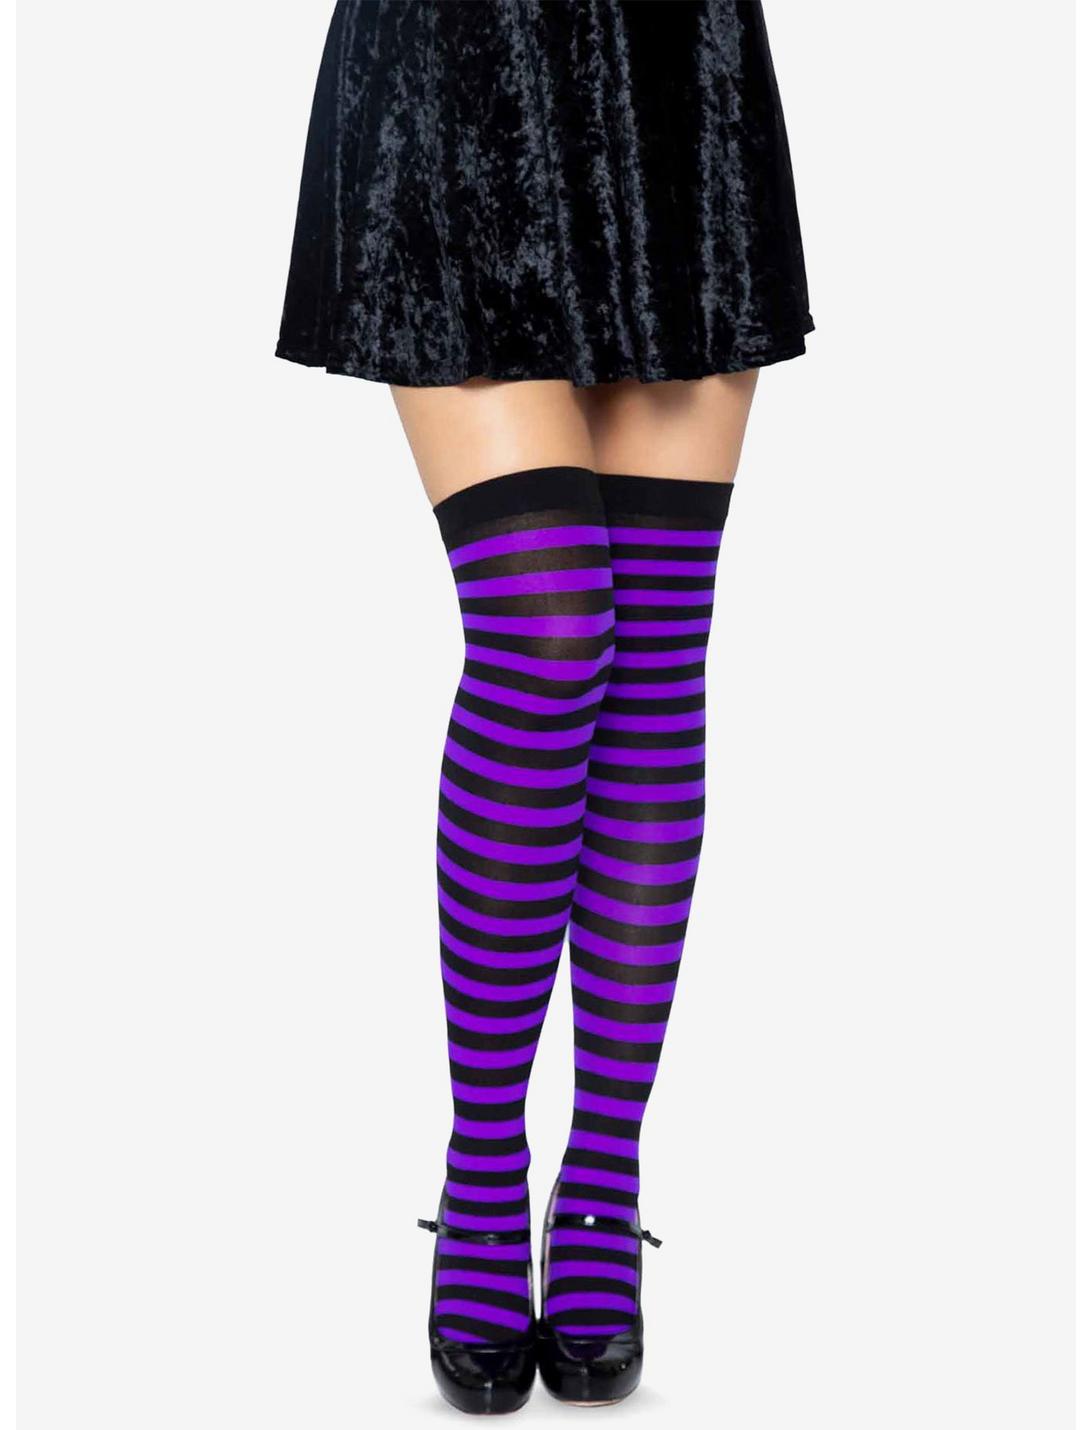 Black And Purple Nylon Over-The-Knee Stocking With Stripes, , hi-res